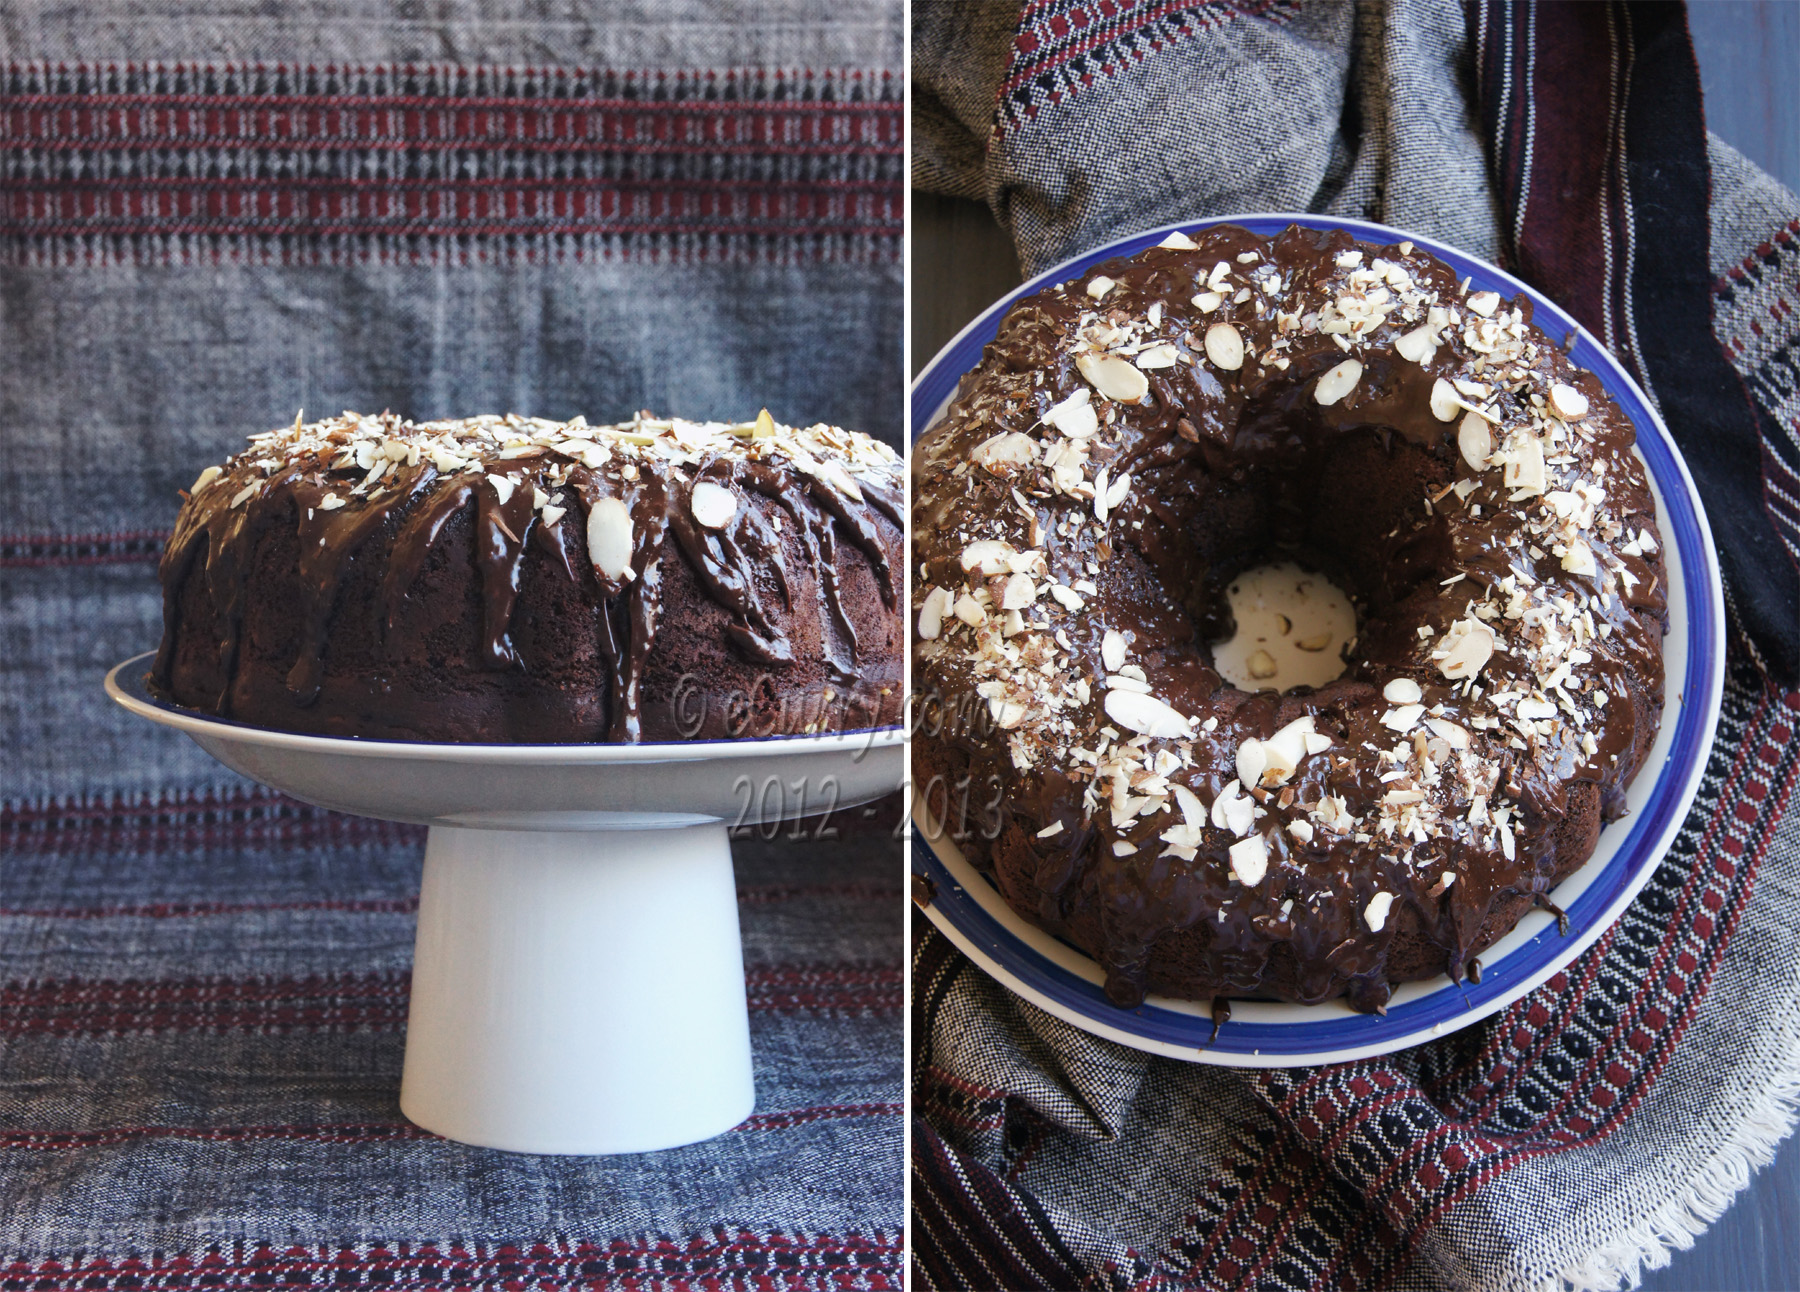 Chocolate Spice Cake with Almonds and Cranberries for the Holidays